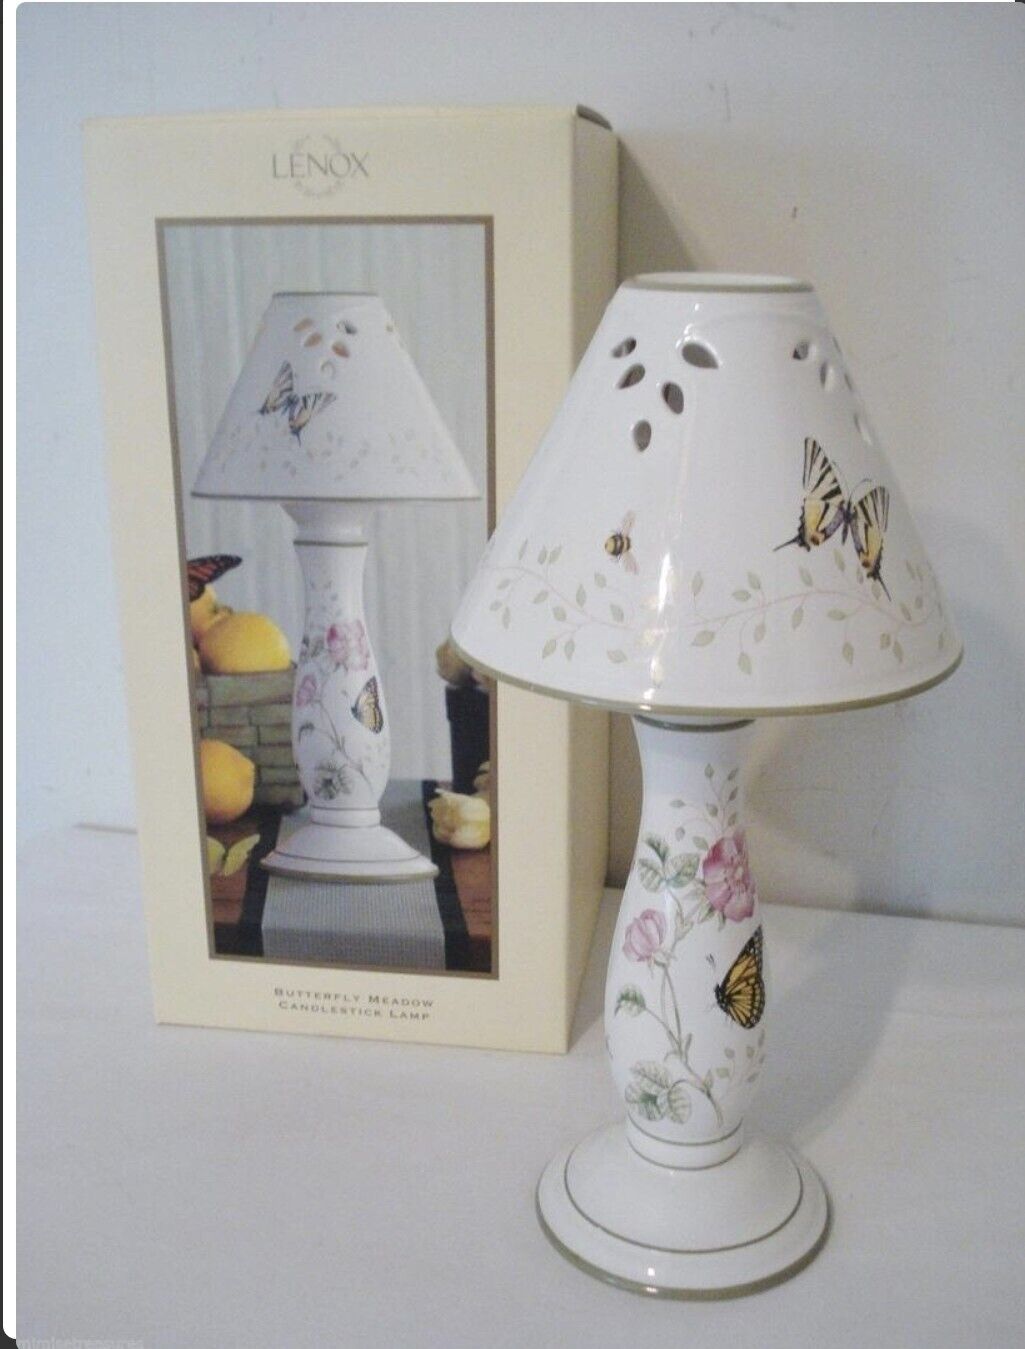 Bran New Lenox Butterfly Meadow Porcelain  Candlestick Lamp & Shade